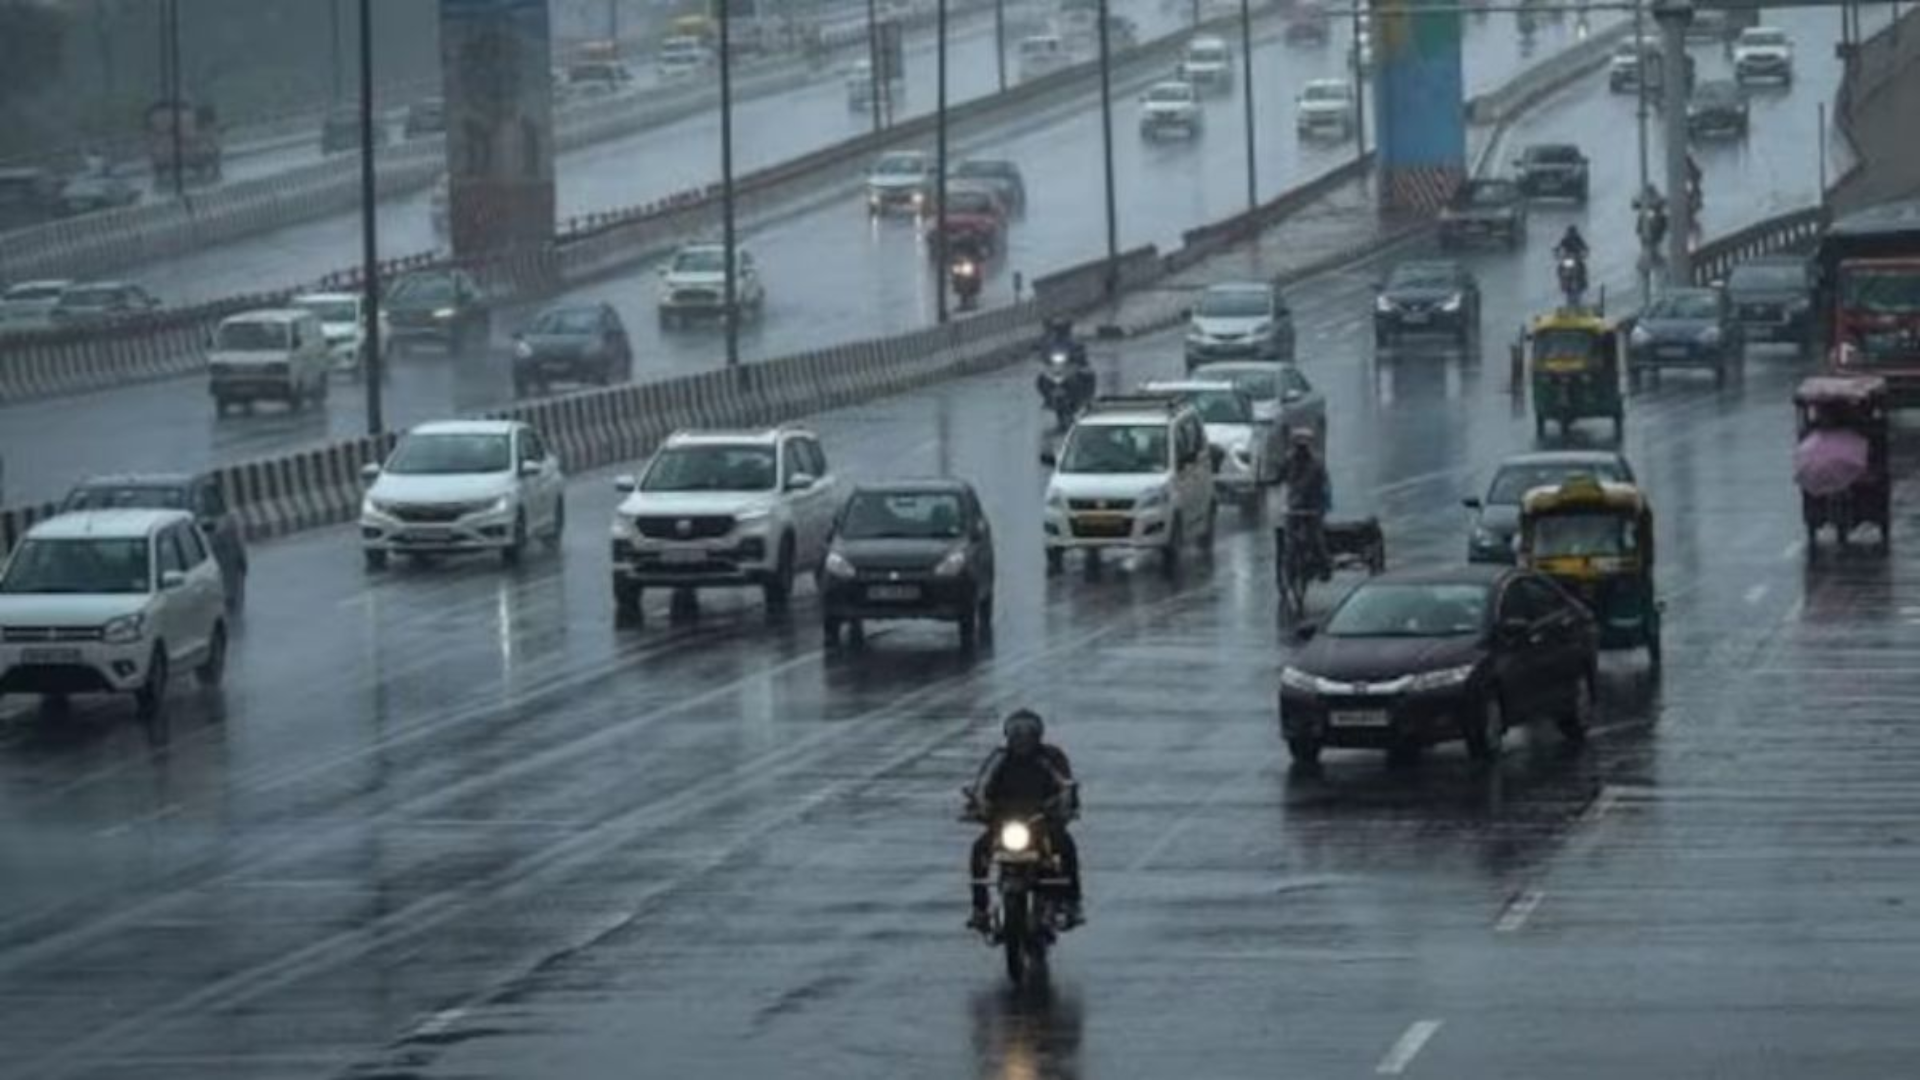 Delhi to Get a Breezy Break: Light Rain and Gusty Winds Expected